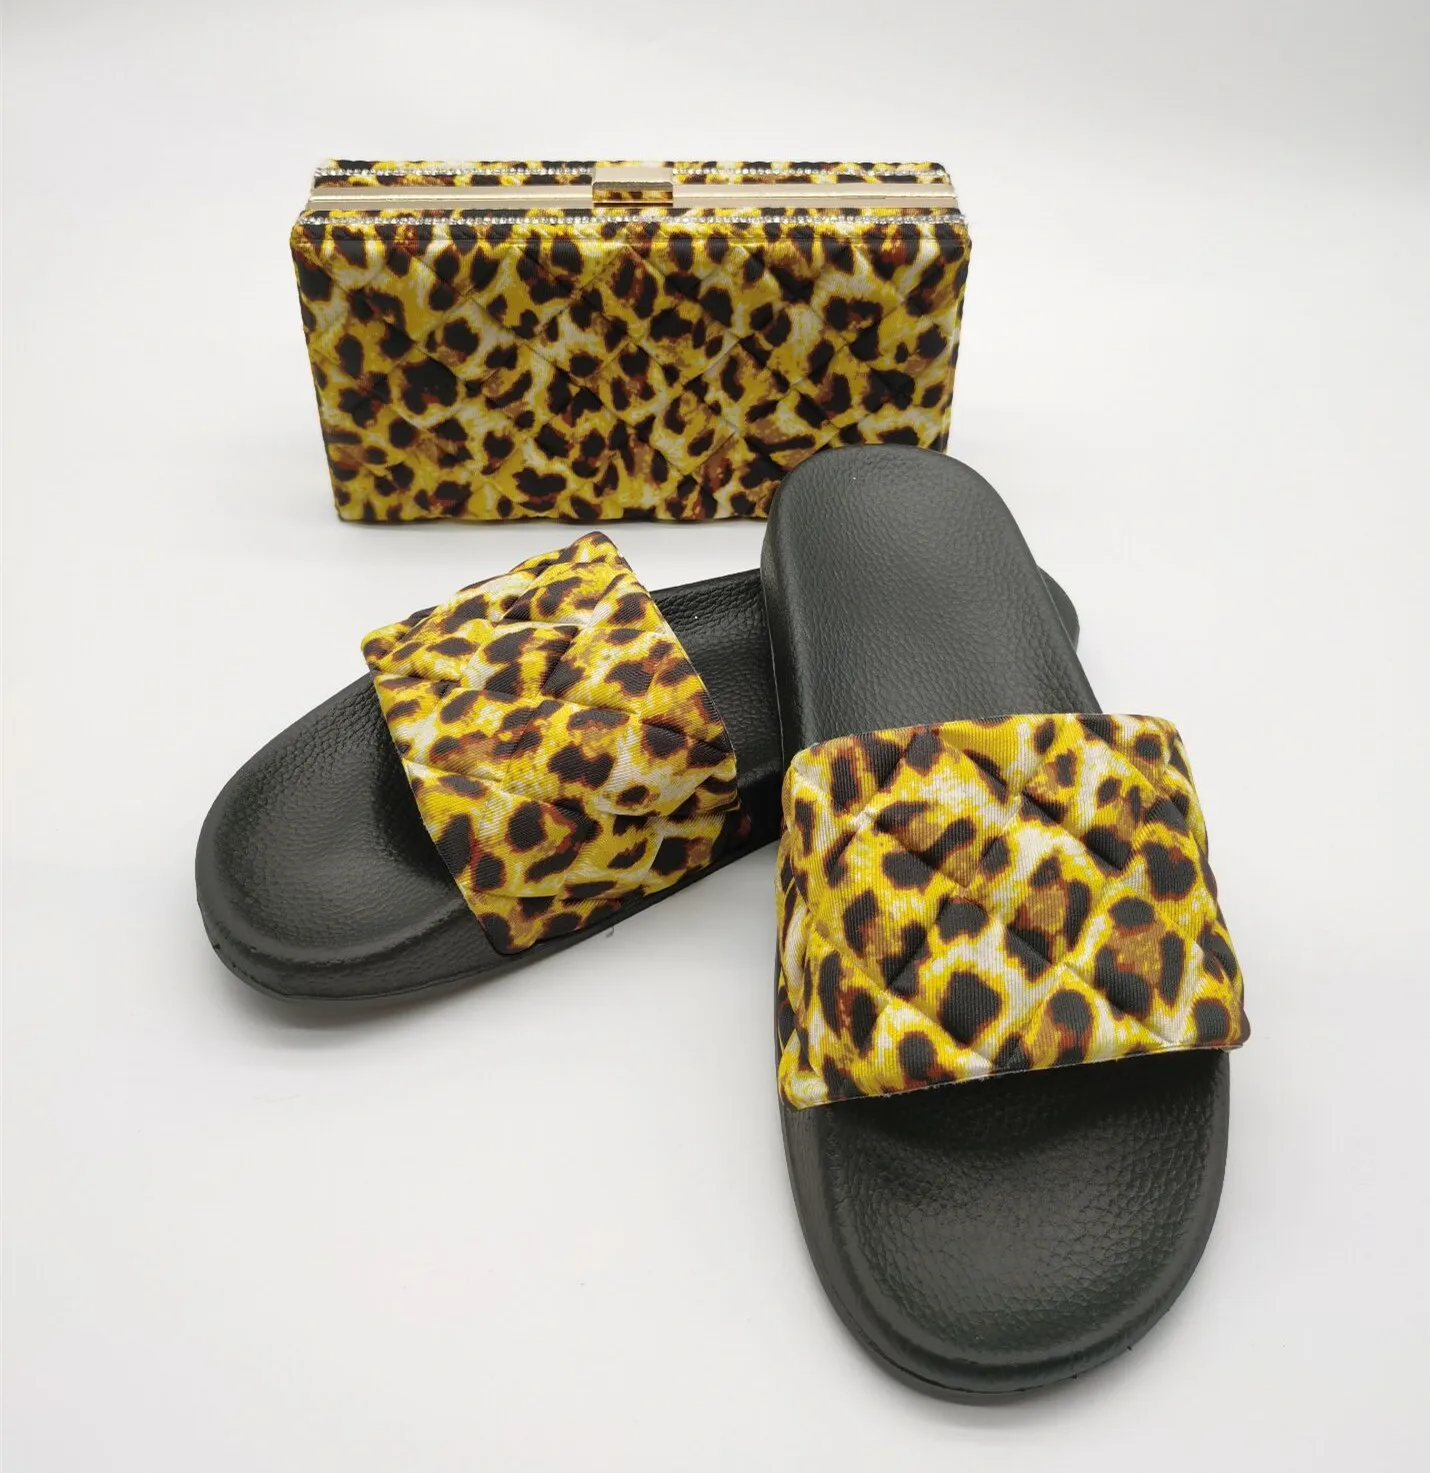 

Leopard printed Clutch and matching shoe slipper square lattice hot hit emboss fabric summer Hasp Fabric square bag set, Colorful